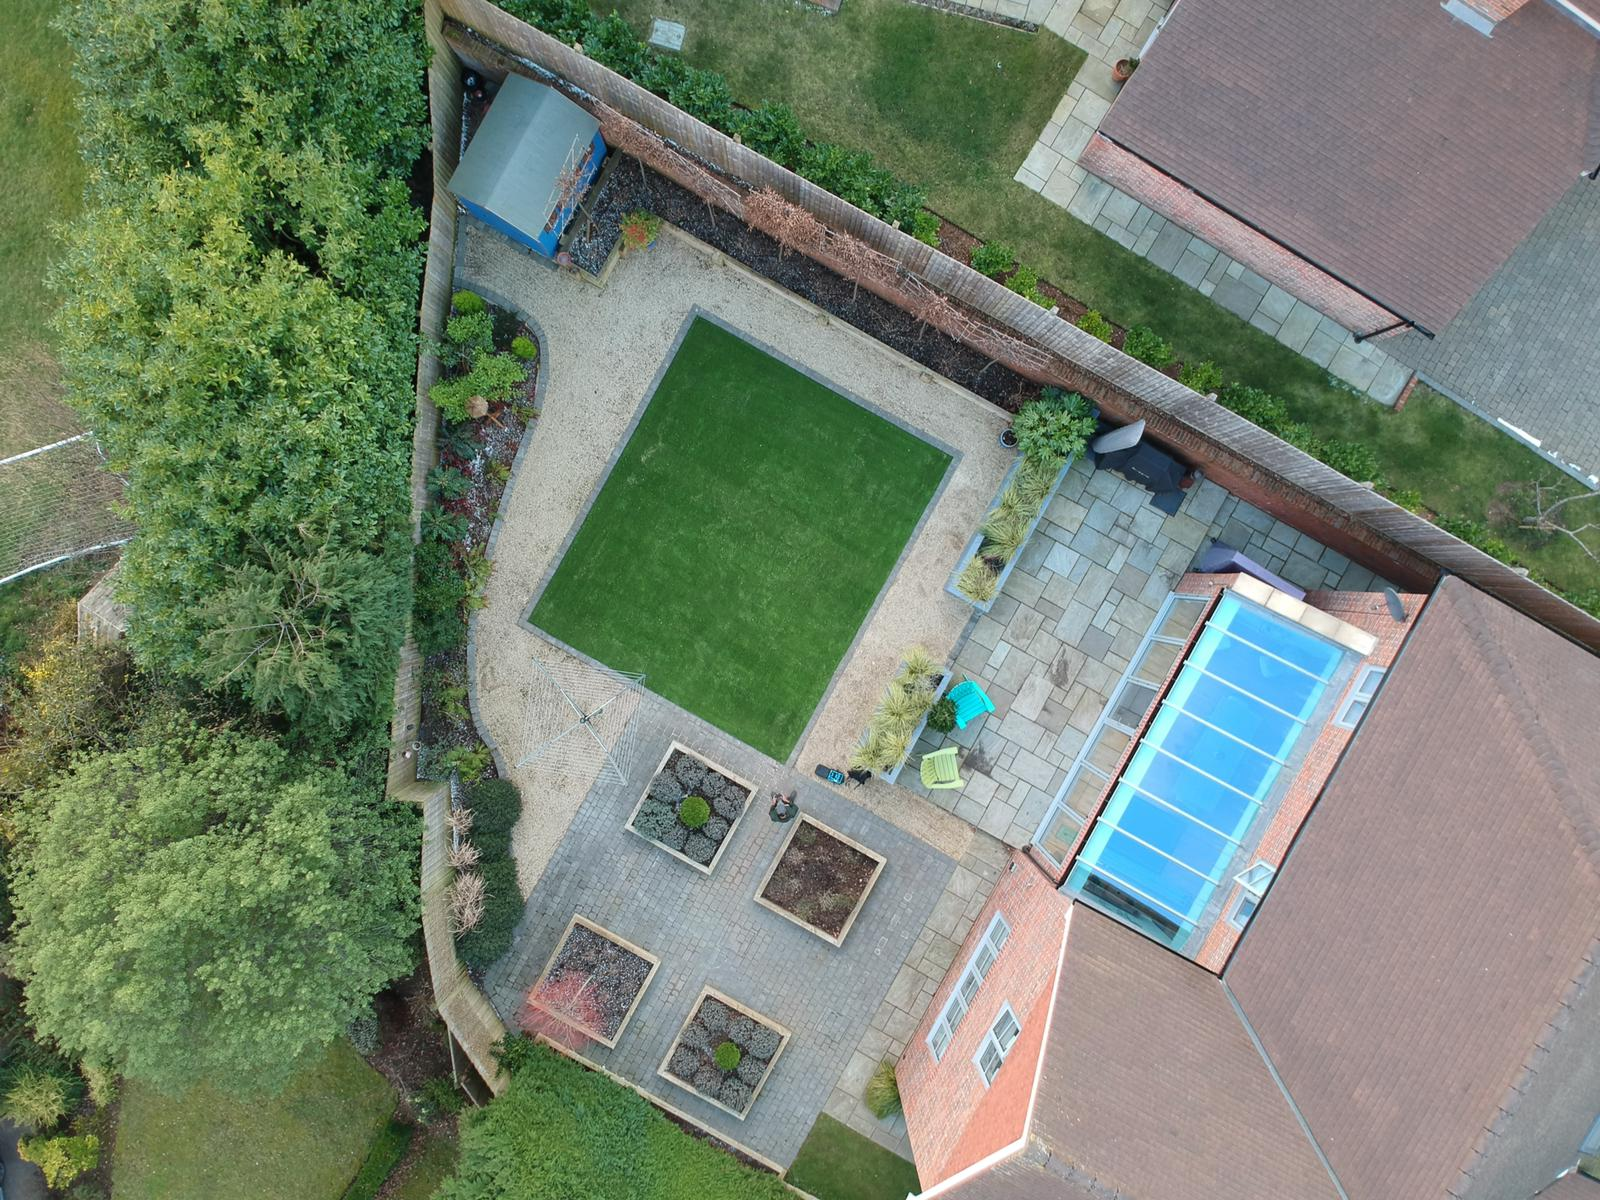 Home artificial turf installation